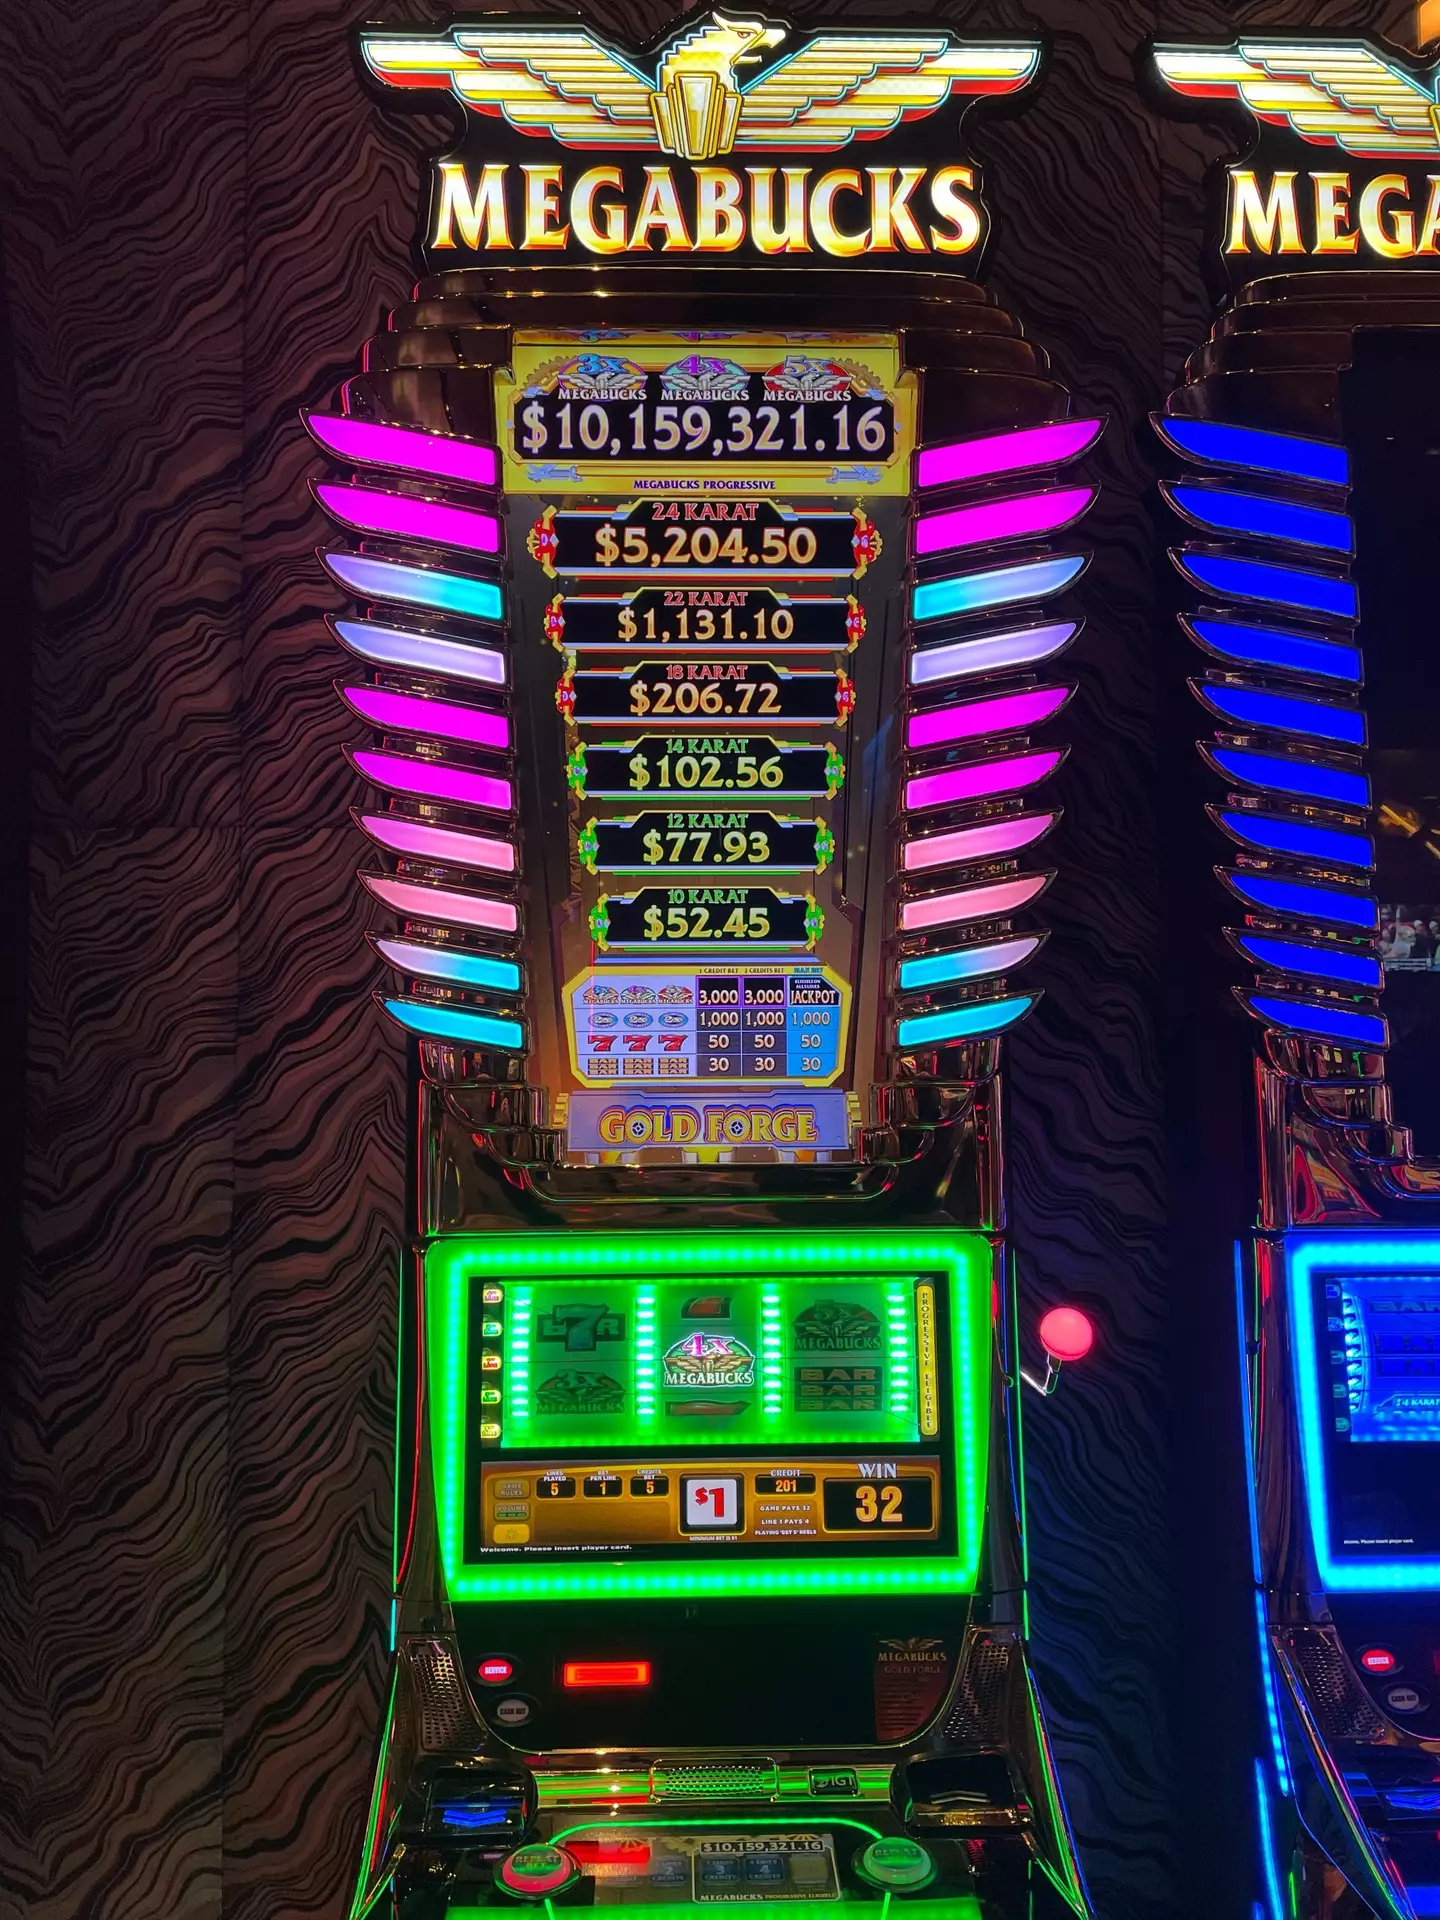 The Megabucks slot machines are notoriously difficult.